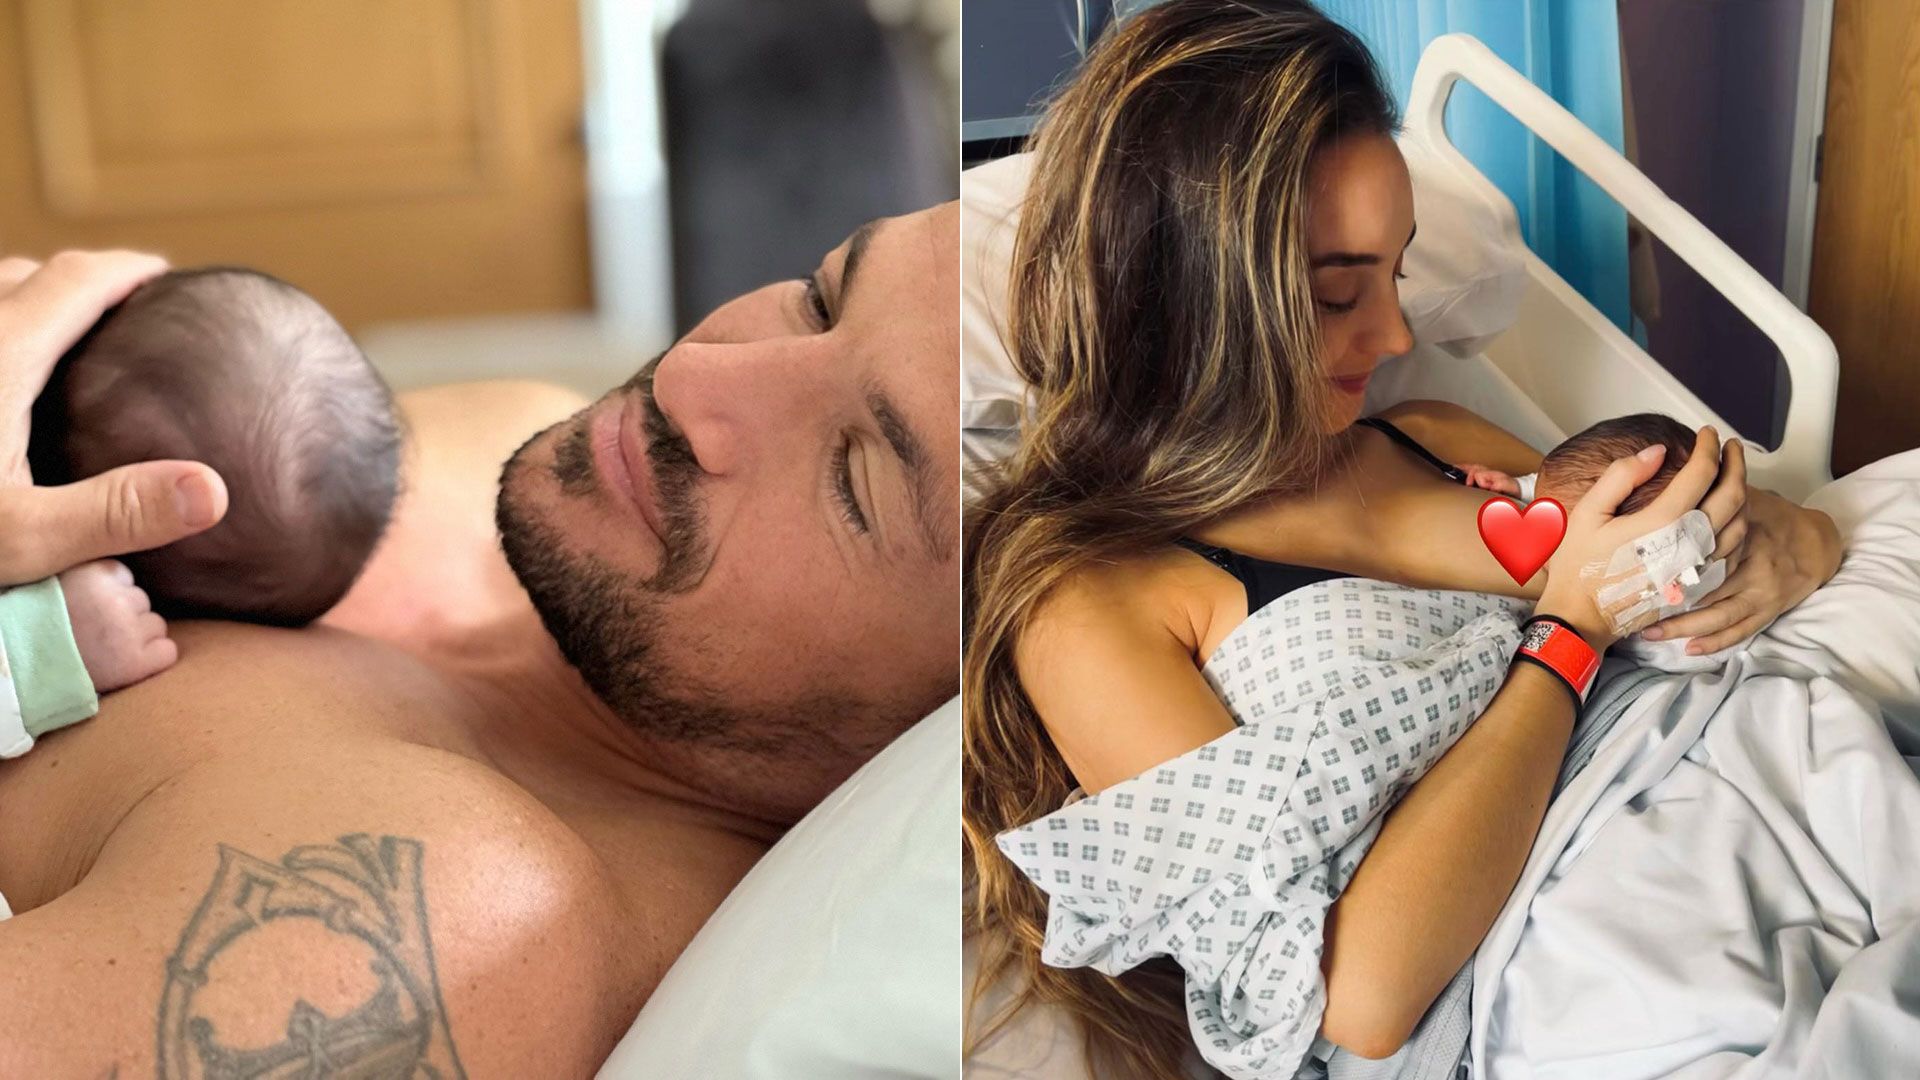 Peter Andre shirtless holding newborn baby split image with wife Emily Andre breastfeeding from hospital bed 